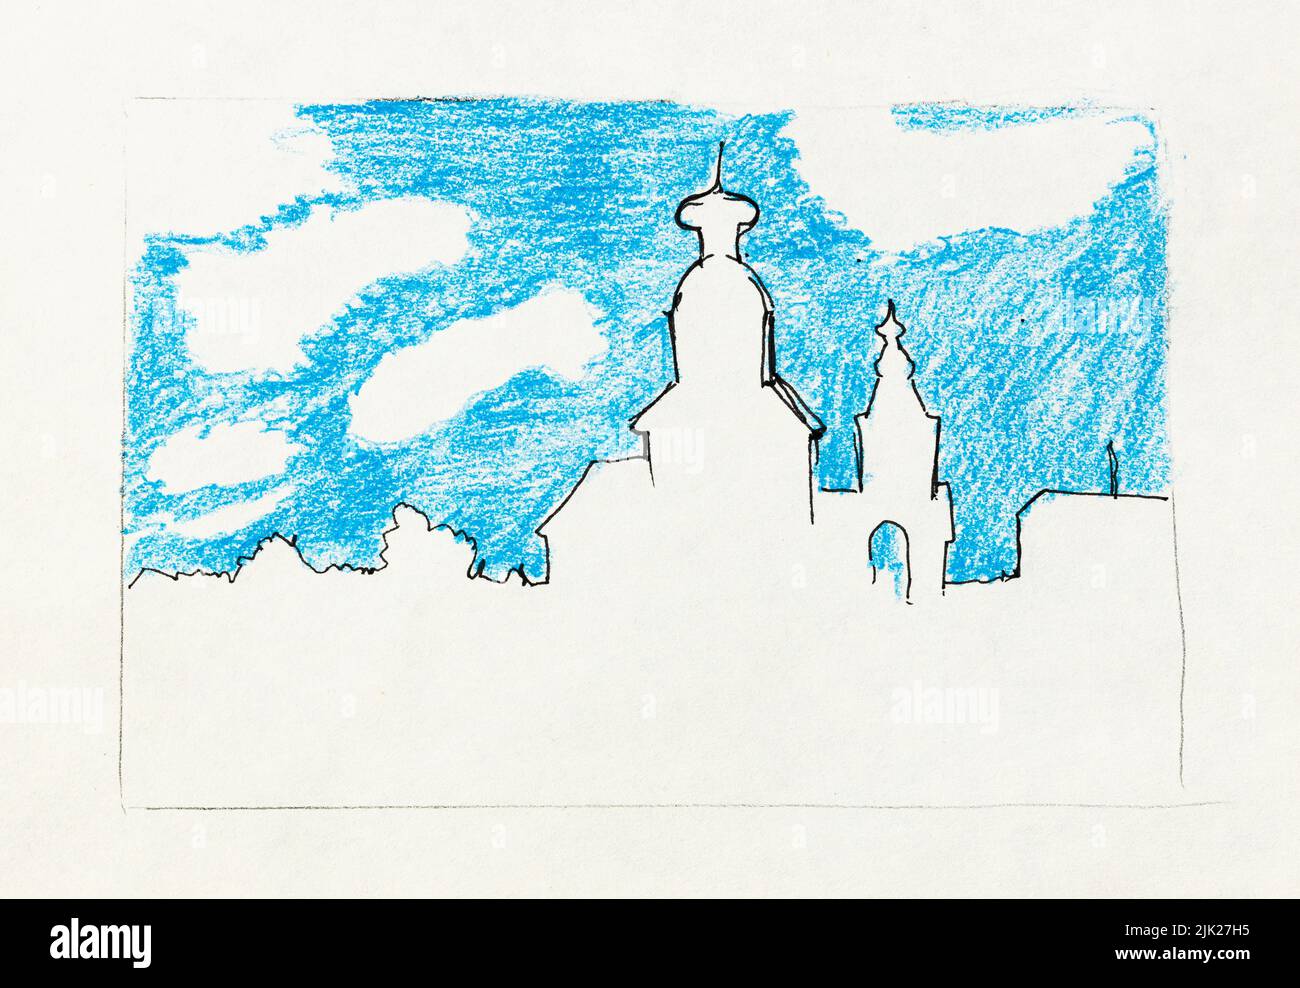 outline sketch of Suzdal town skyline Russia under blue sky with white clouds in hand-drawn with black pen and color pencil on old white textured pape Stock Photo